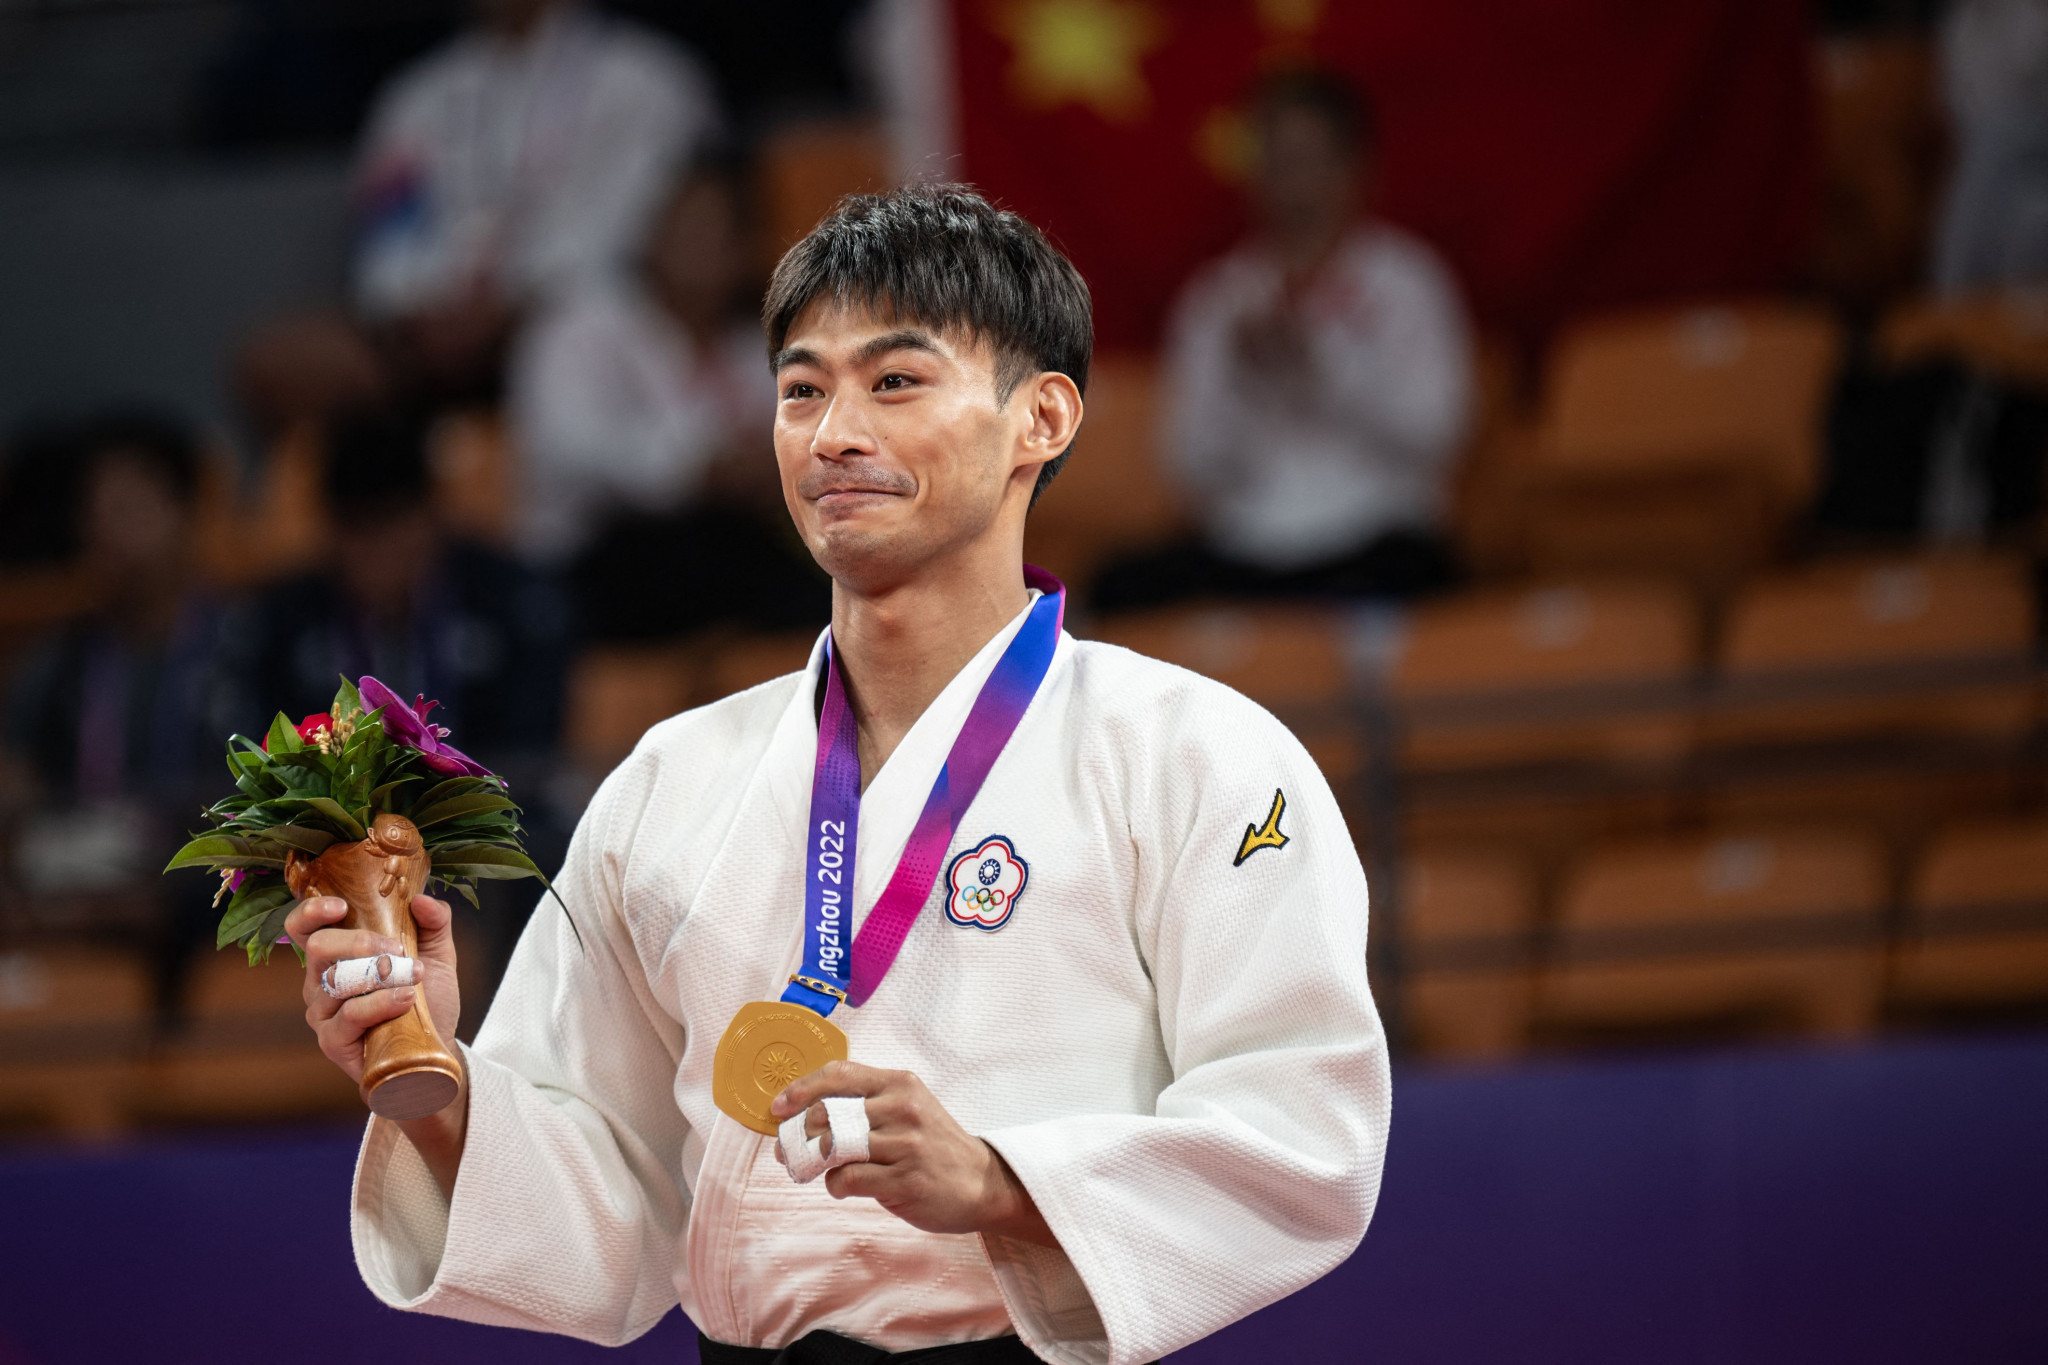 Yang Yung Wei was left emotional after clinching the men's under-60kg gold medal ©Getty Images